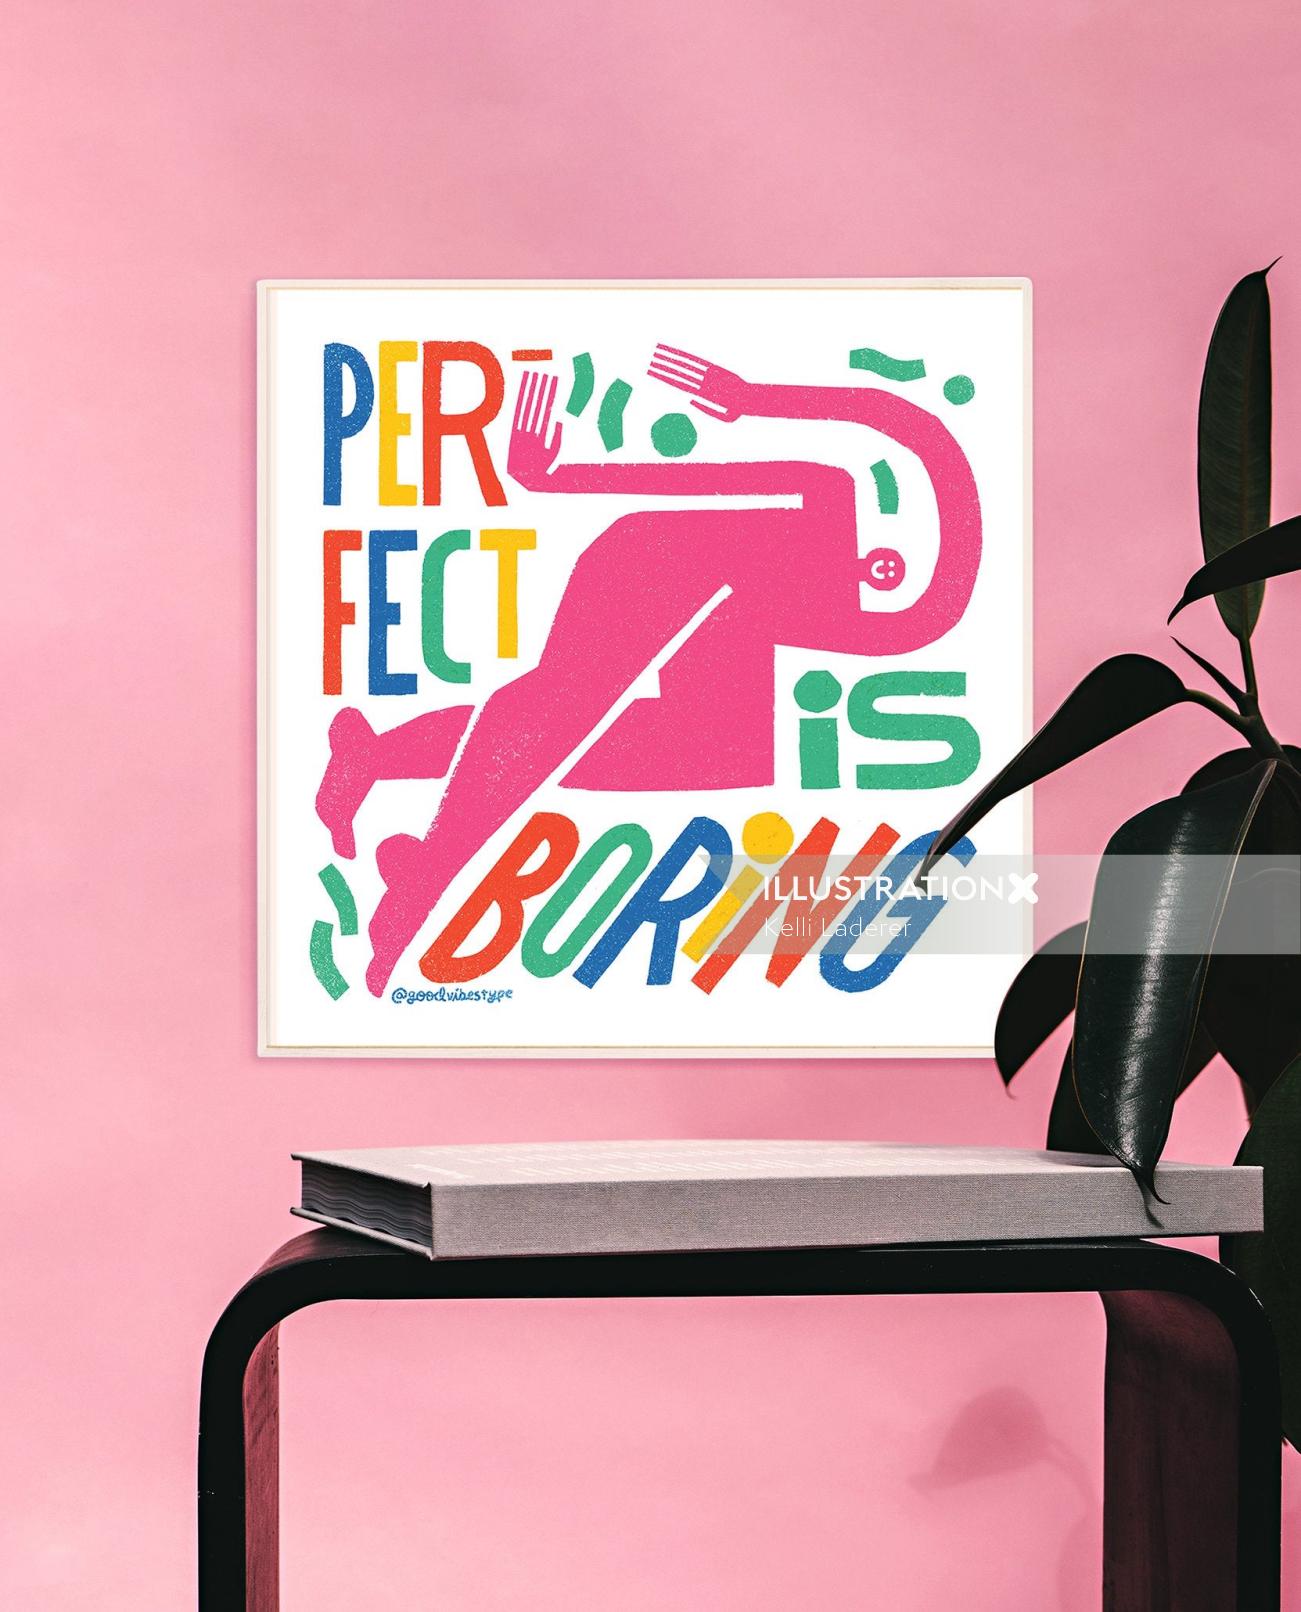 Perfection is boring mental health awareness typography